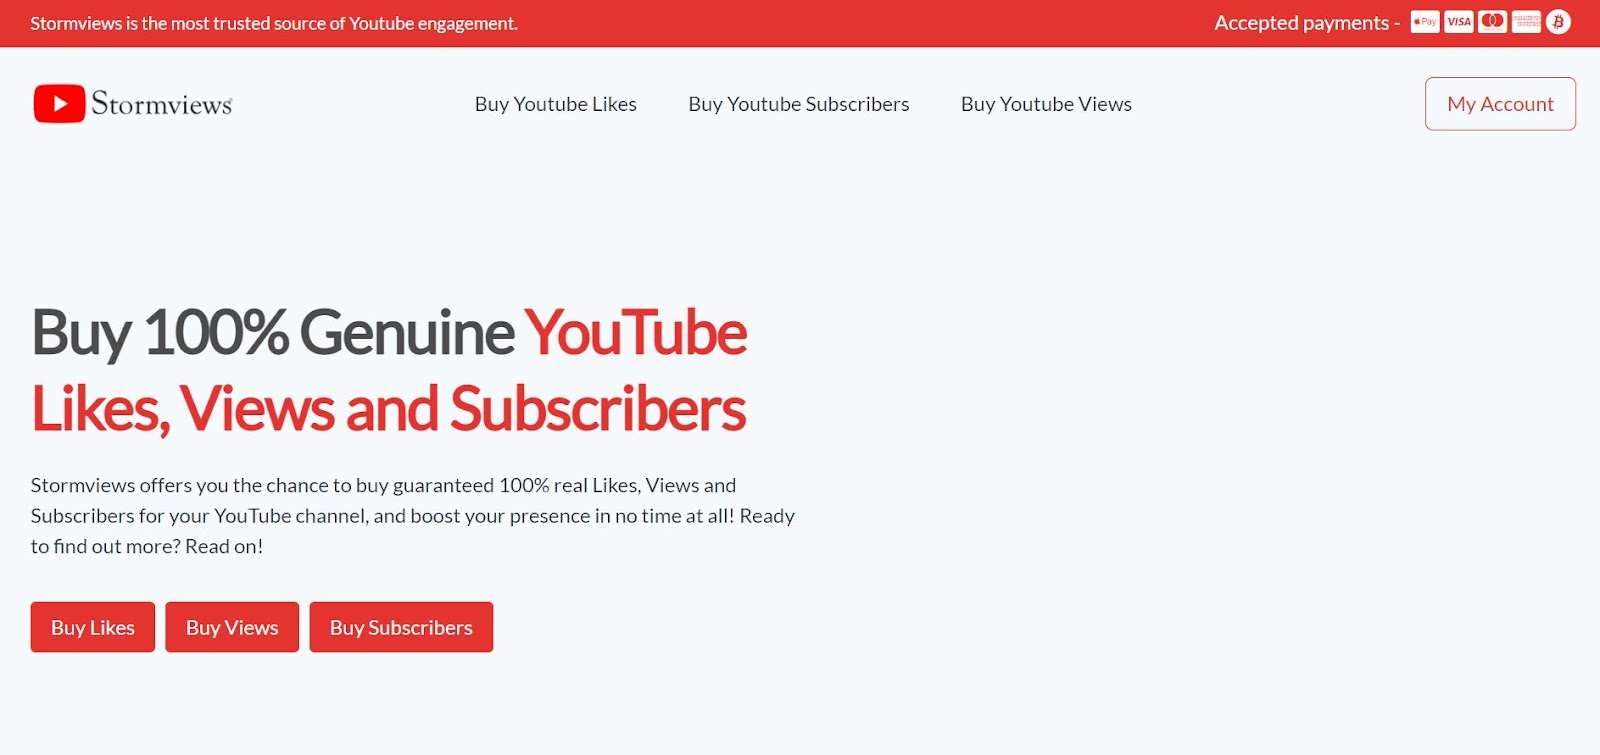 buy youtube views and buy youtube subscribers